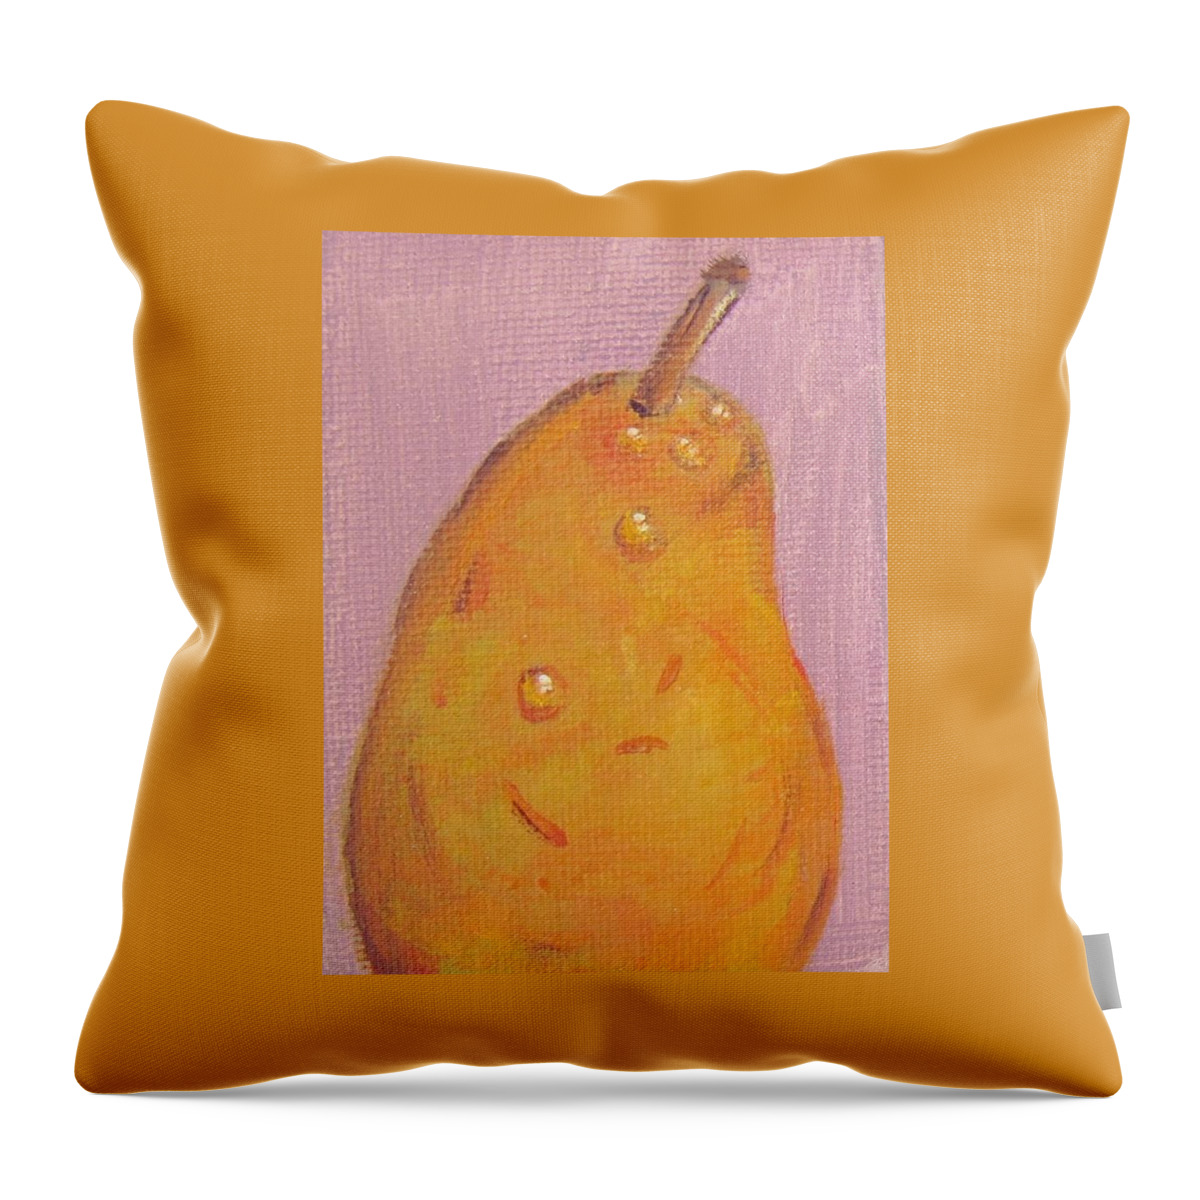 Pear Throw Pillow featuring the Juicy Pear by Laurie Morgan